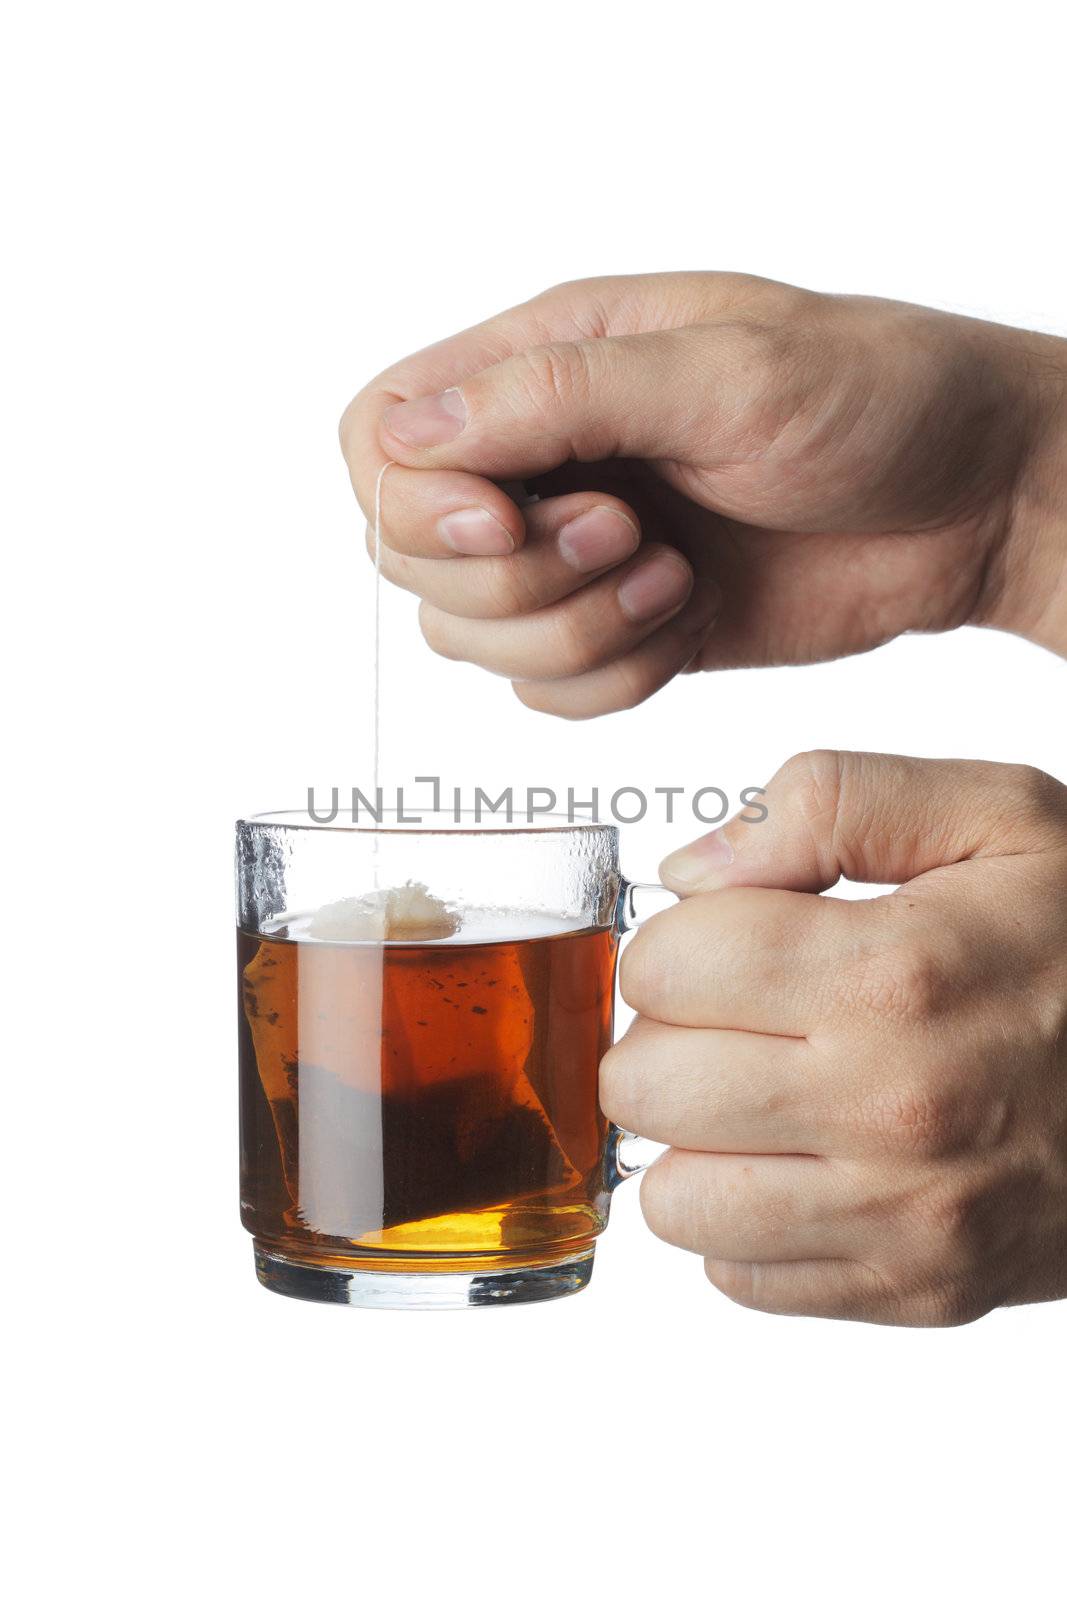 Teabag in a transparent glass tea mug with hot water